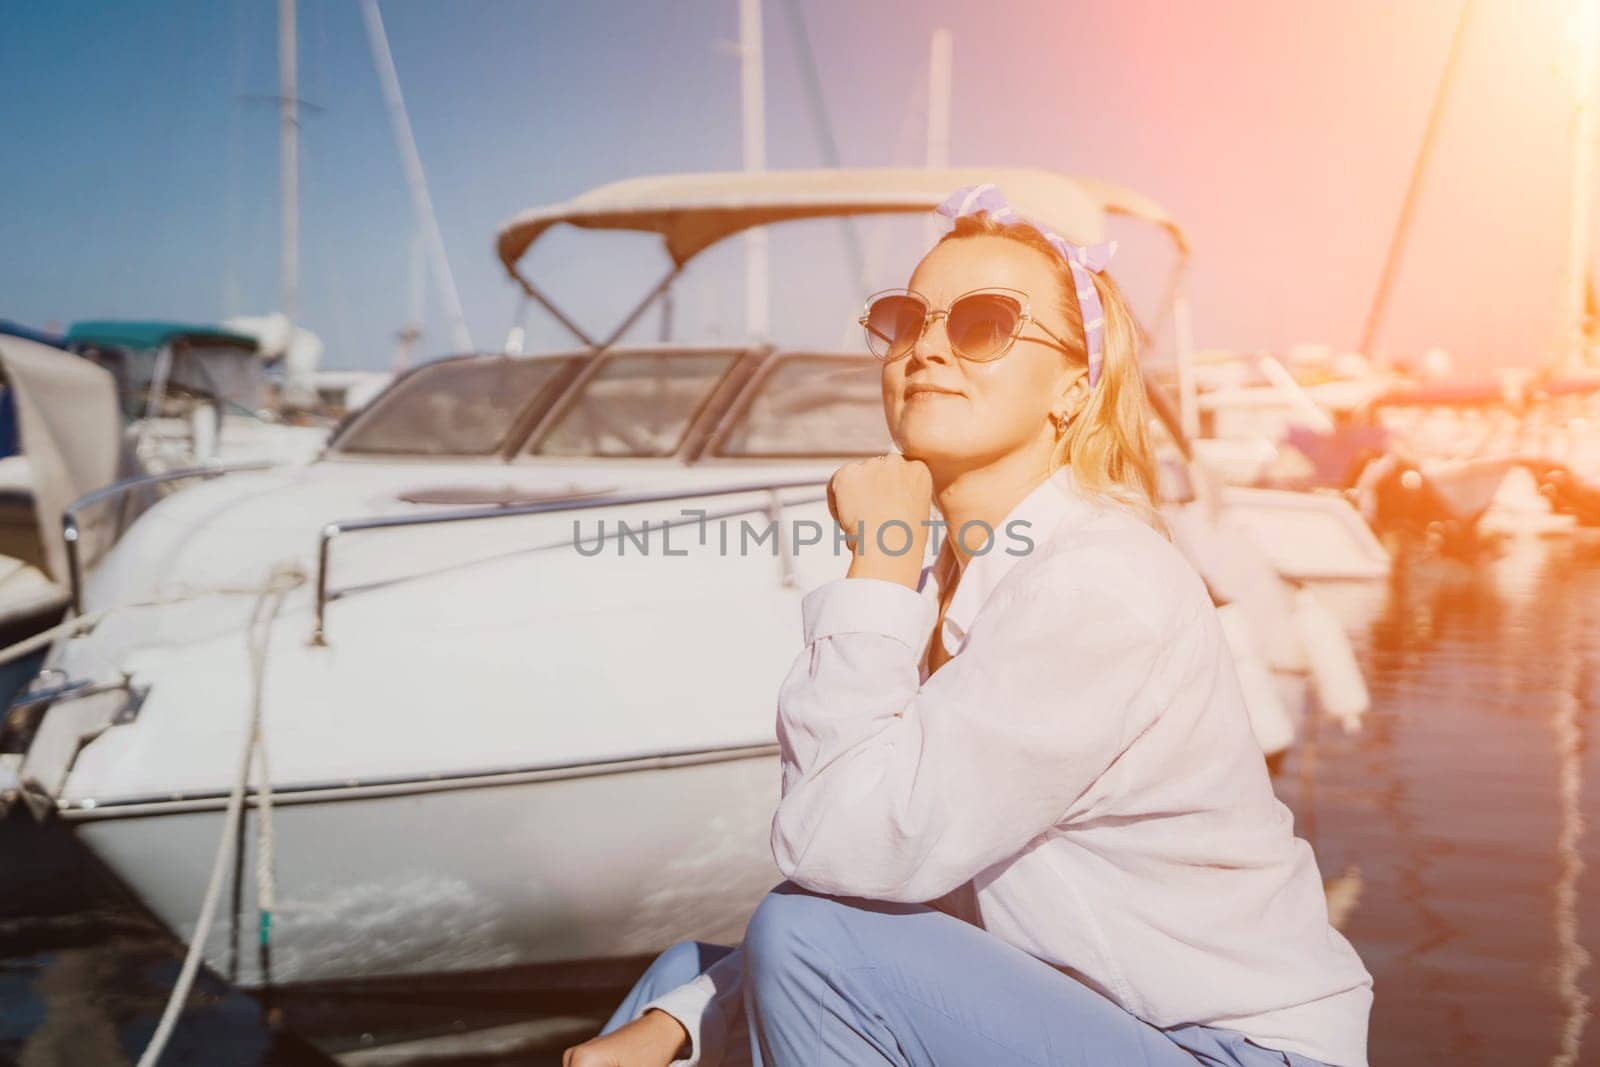 Woman in white shirt in marina , surrounded by several other boats. The marina is filled with boats of various sizes, creating a lively and picturesque atmosphere